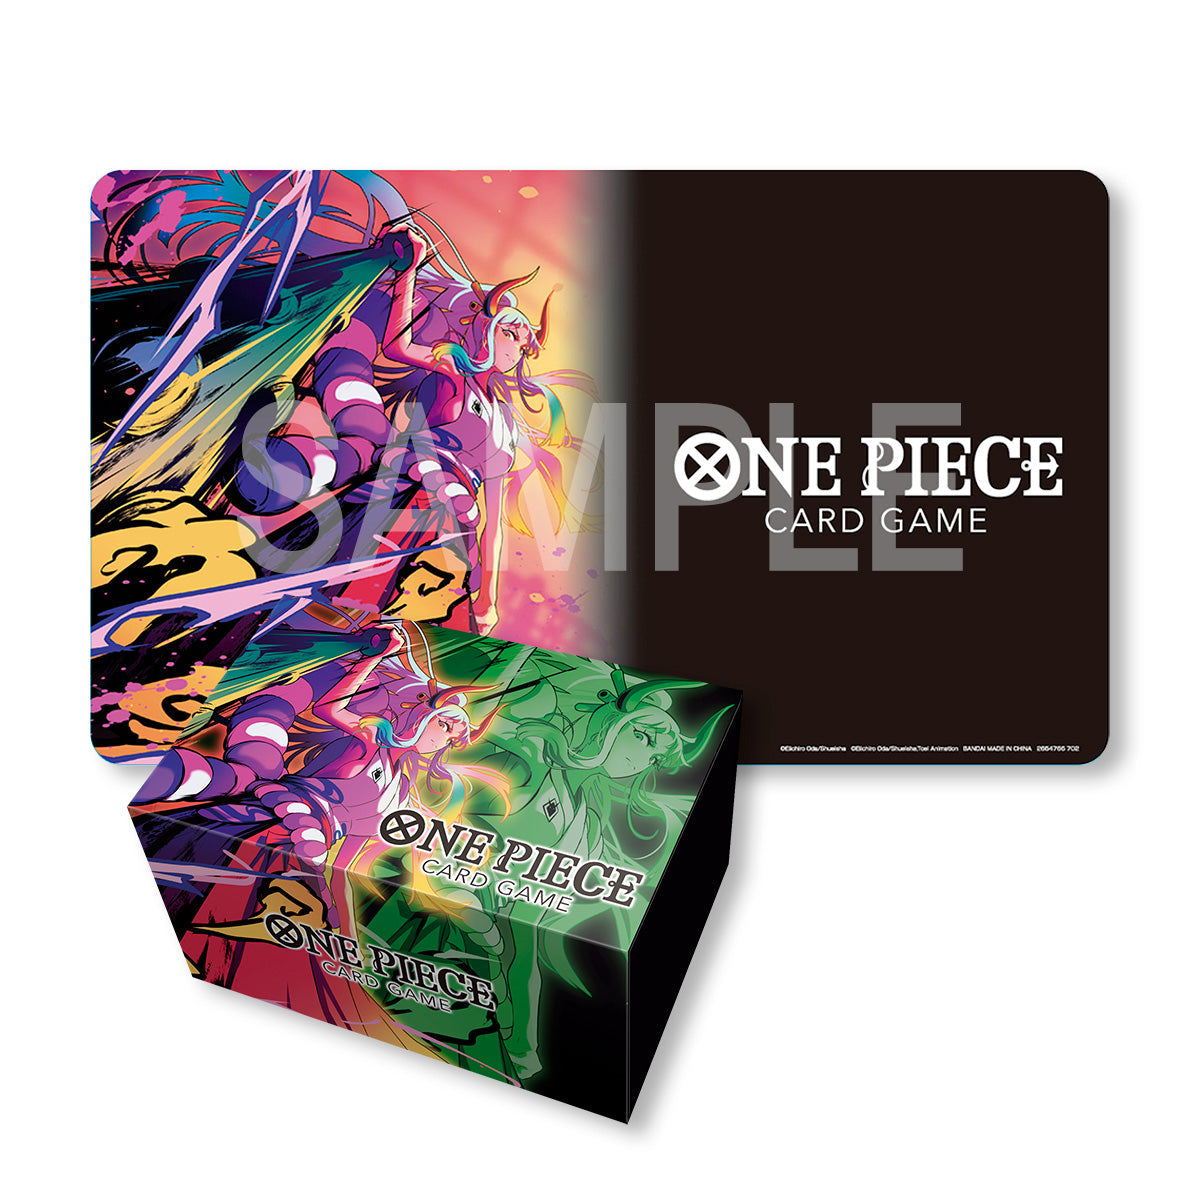 401 Games Canada - One Piece Card Game - Playmat/Card Case Set